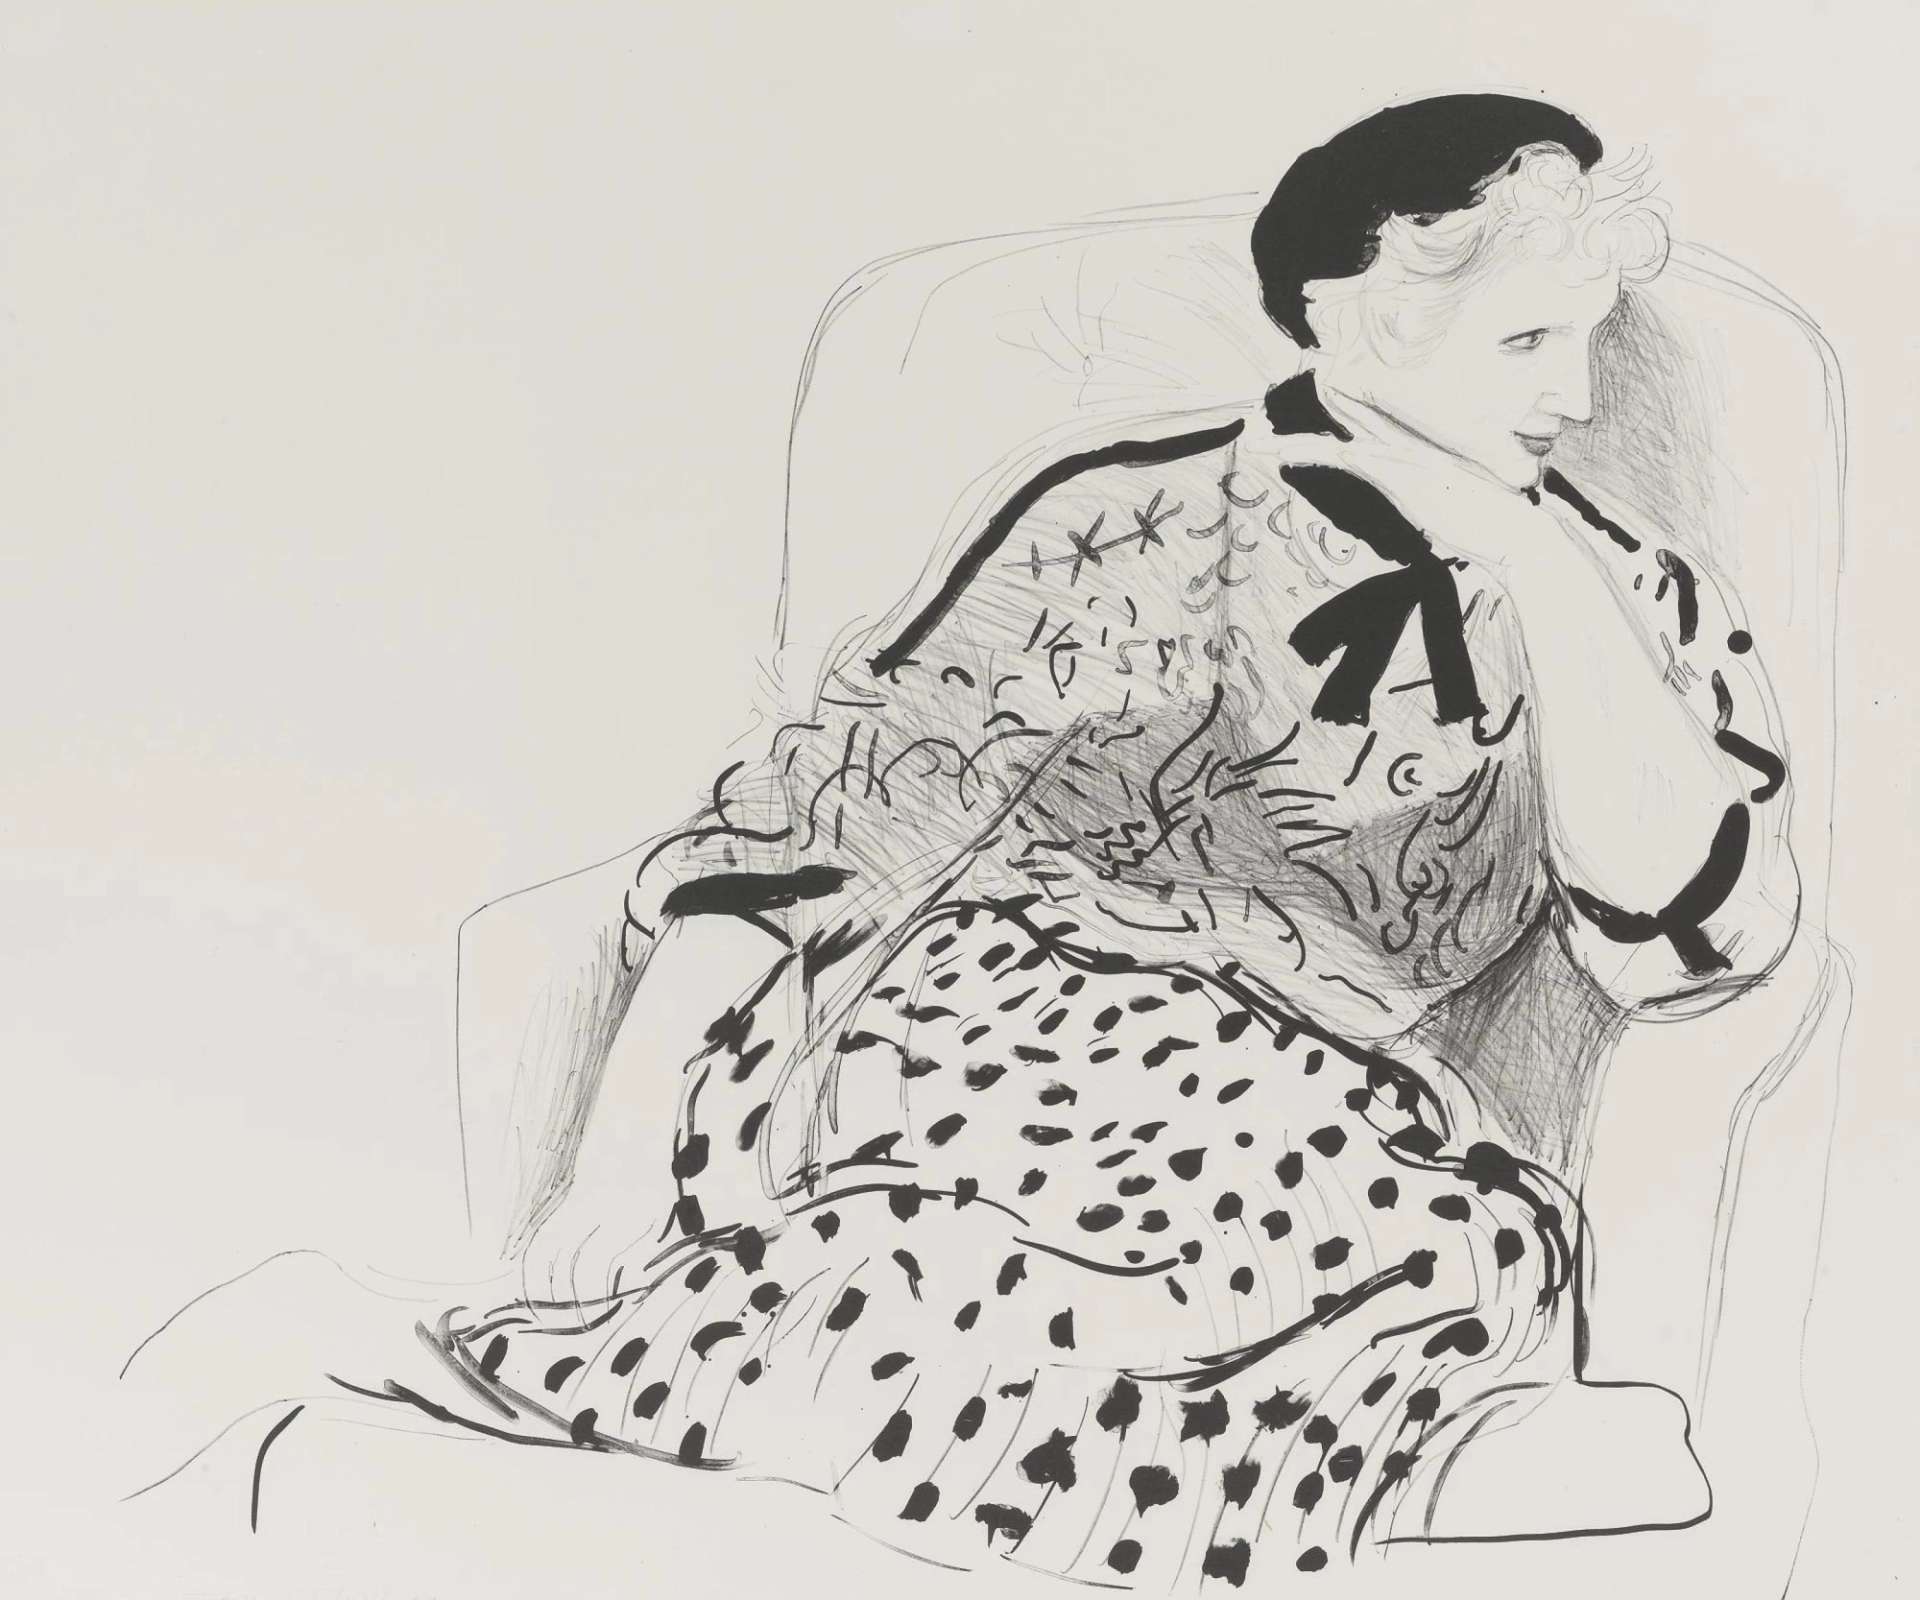  Celia Birtwell is shown curled up in an armchair, her head turned to the side in profile, her hand resting underneath her chin. She appears to be listening intently to someone ‘offscreen’, her elegant features seemingly unaware of the artist’s gaze. She wears a sheer top embroidered with flowers or an abstract pattern, and a full pleated skirt which covers her legs.